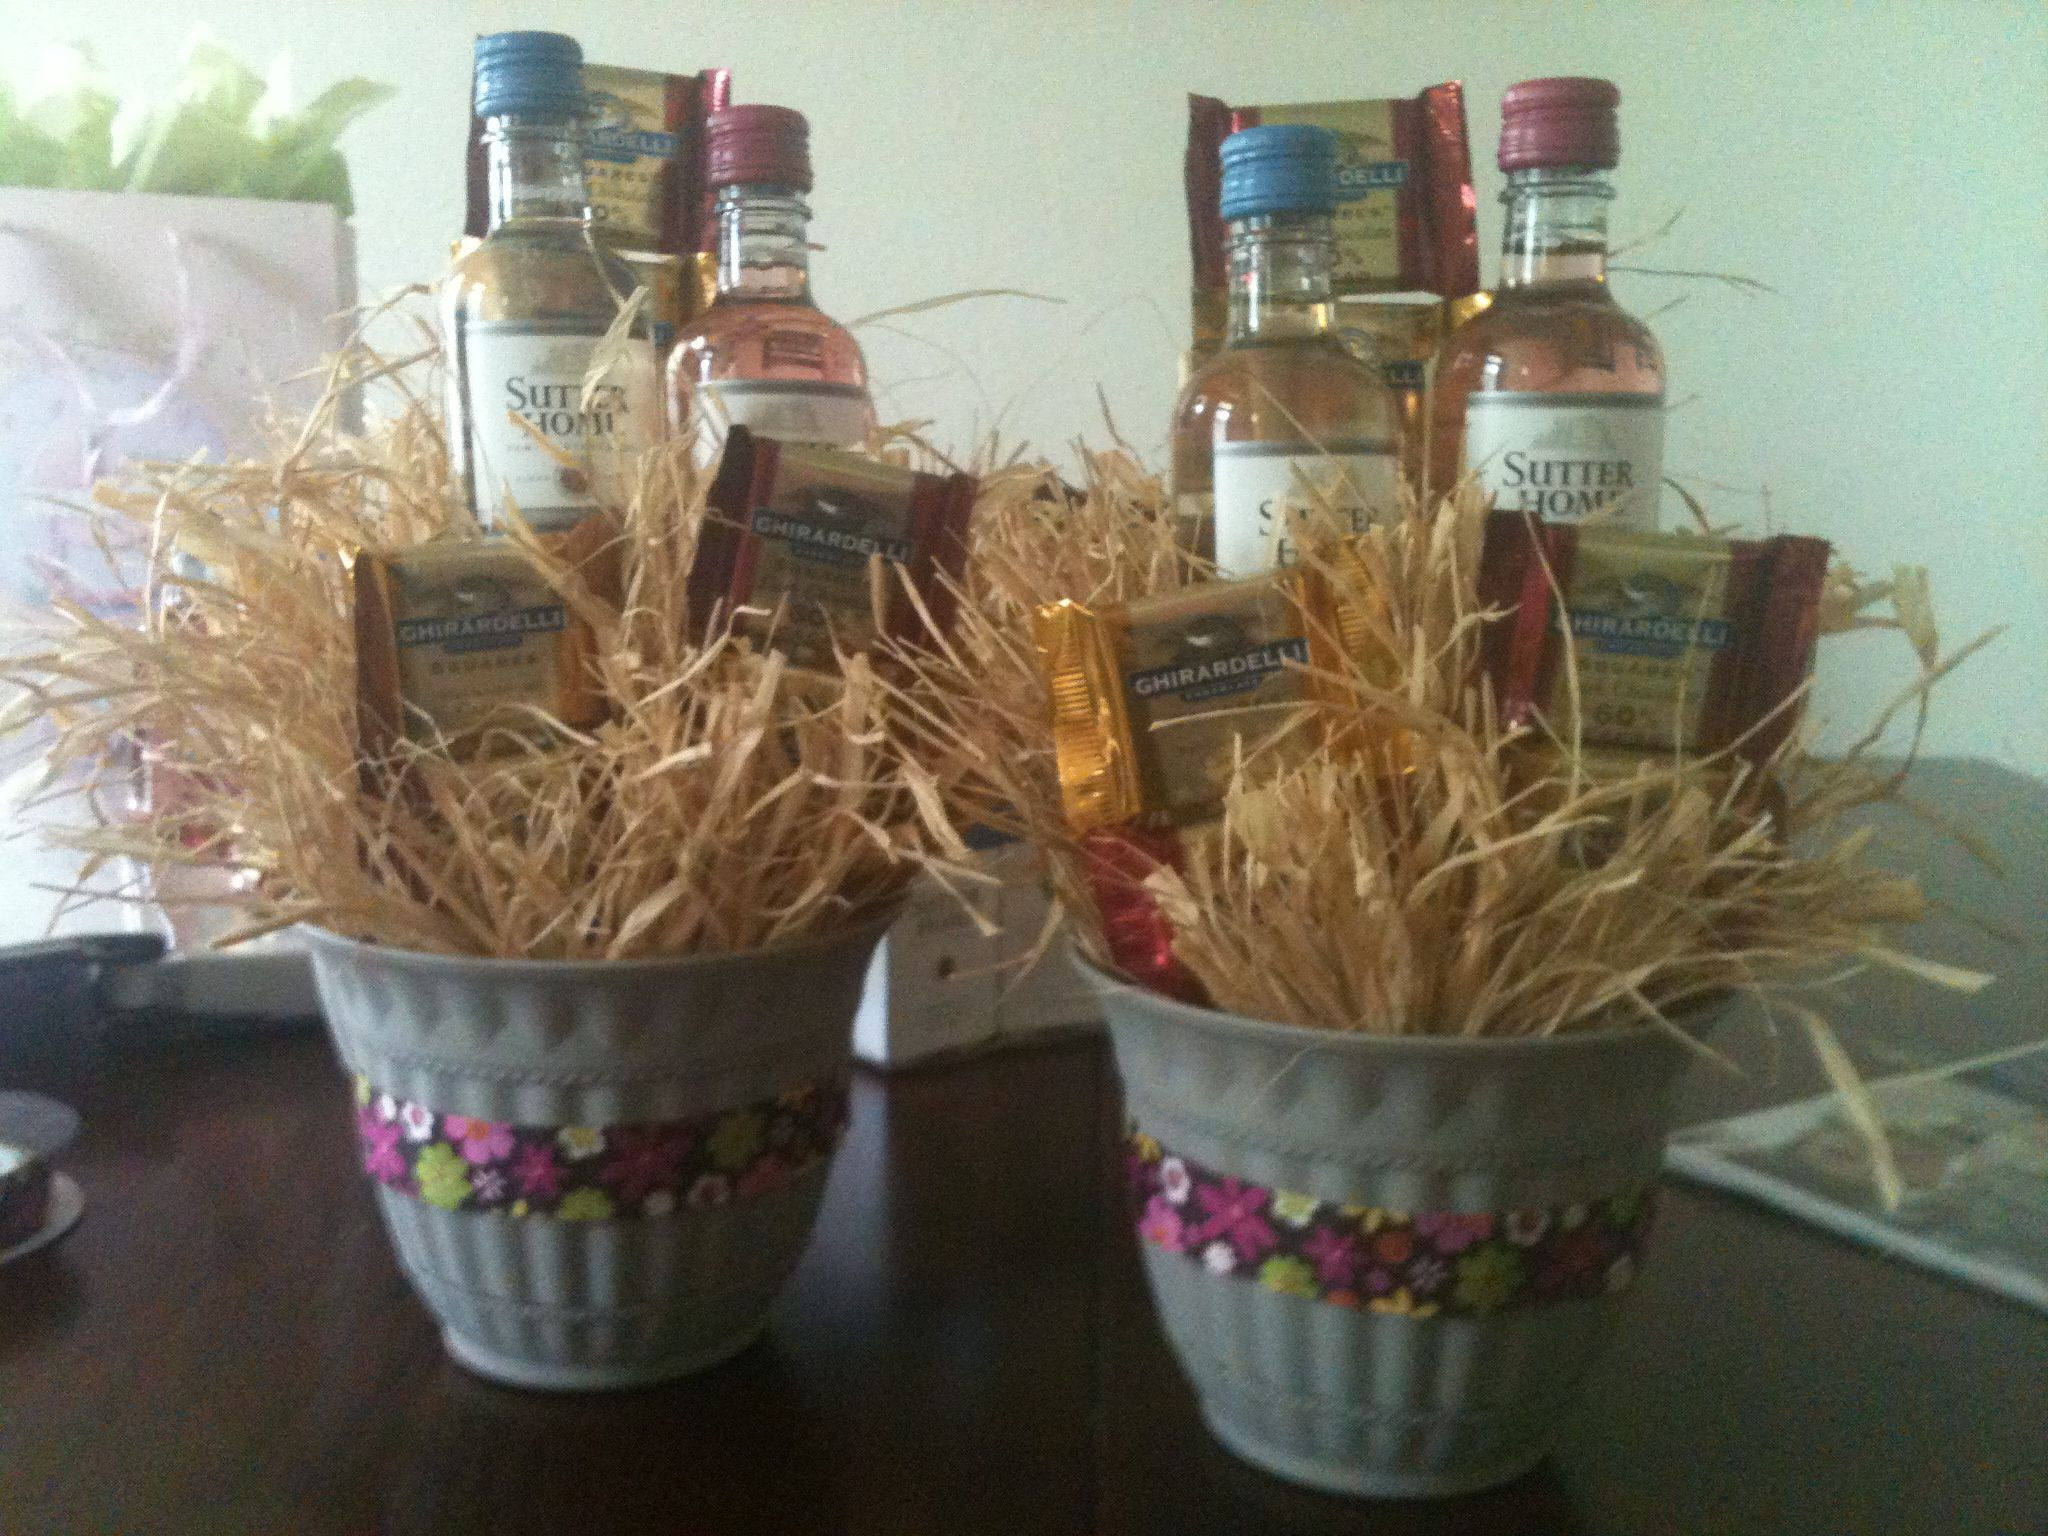 Wine Themed Gift Basket Ideas
 Create small t baskets with wine & chocolate for your